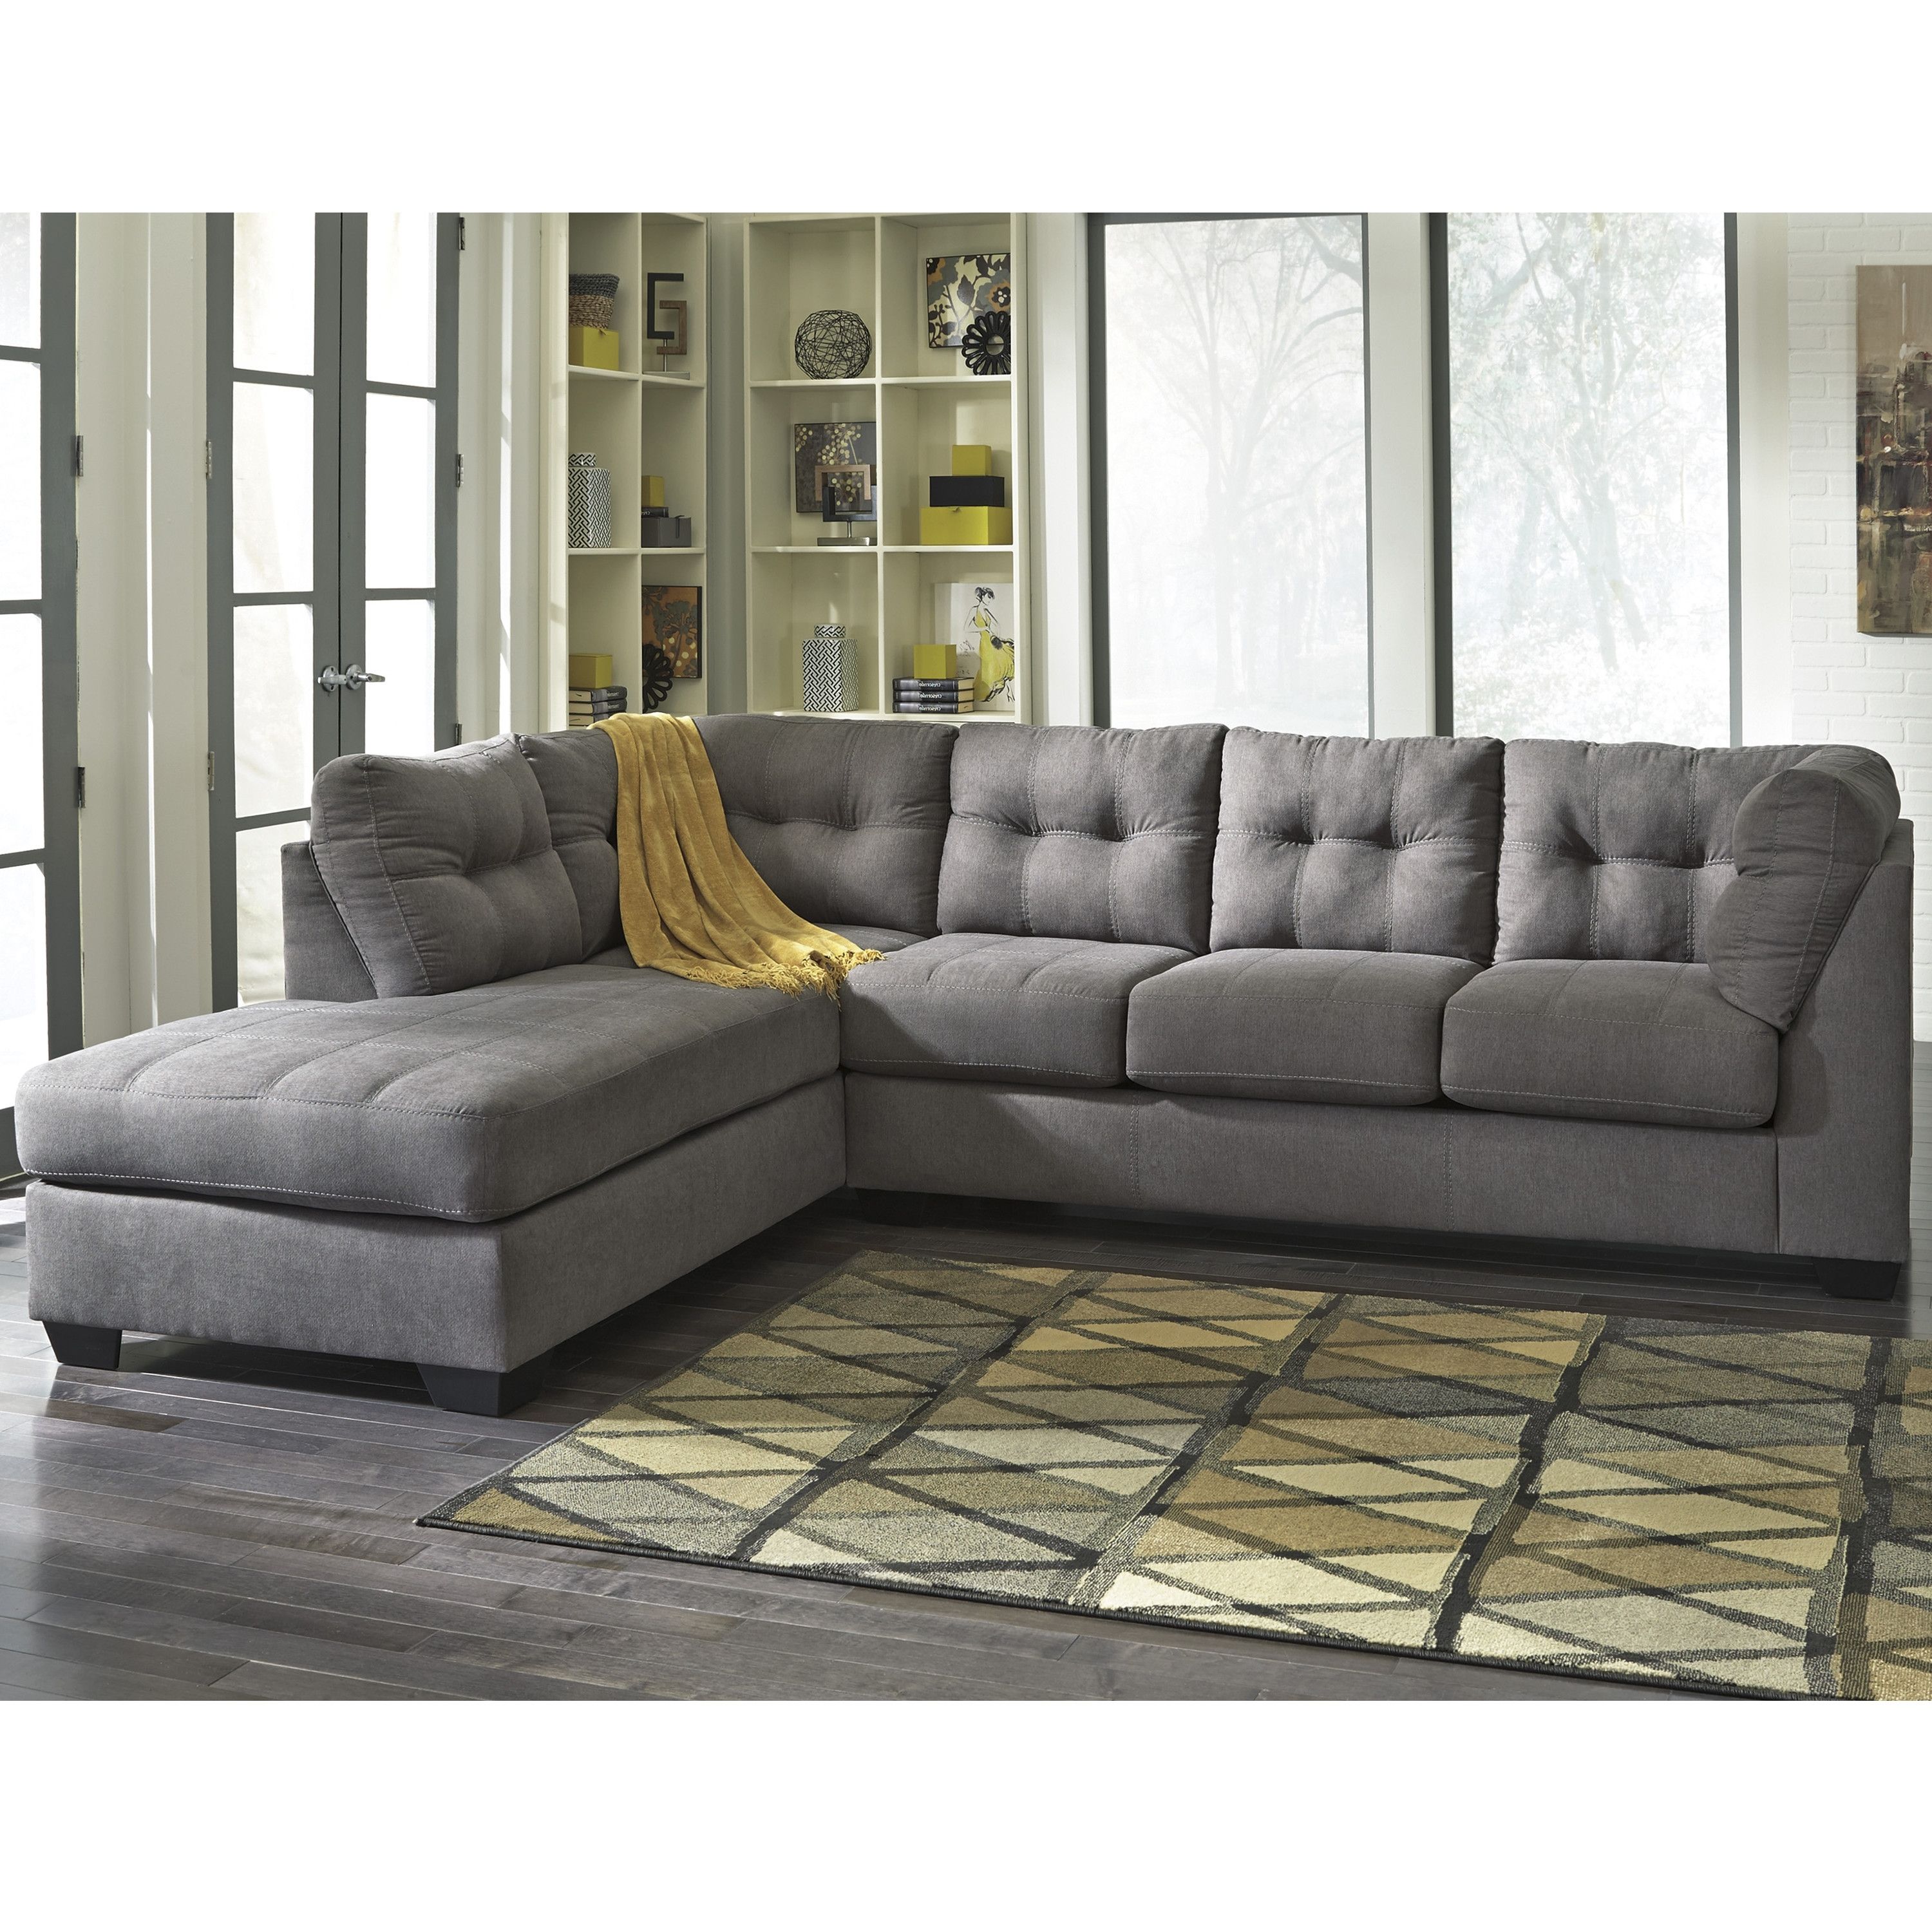 Luxury Sectional Sofas Portland 51 For Your Leather And Cloth Intended For Portland Sectional Sofas (View 4 of 10)